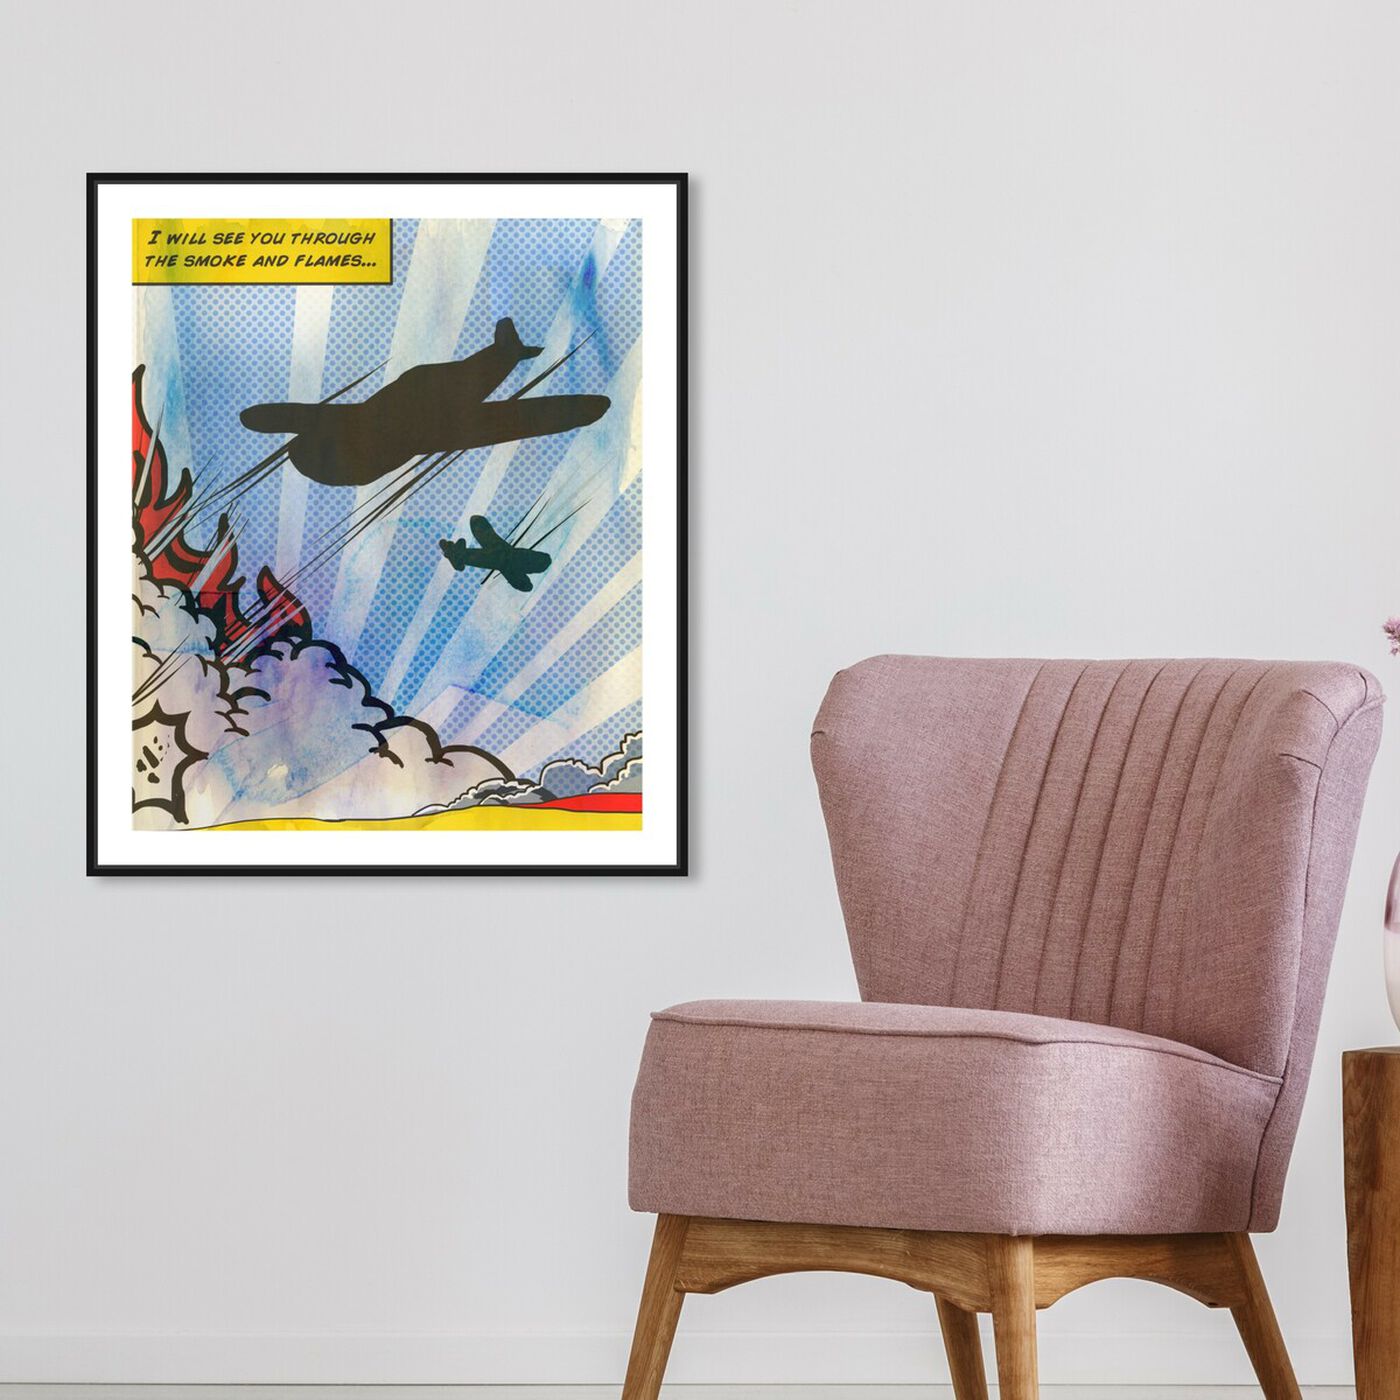 Hanging view of Rockets featuring advertising and comics art.